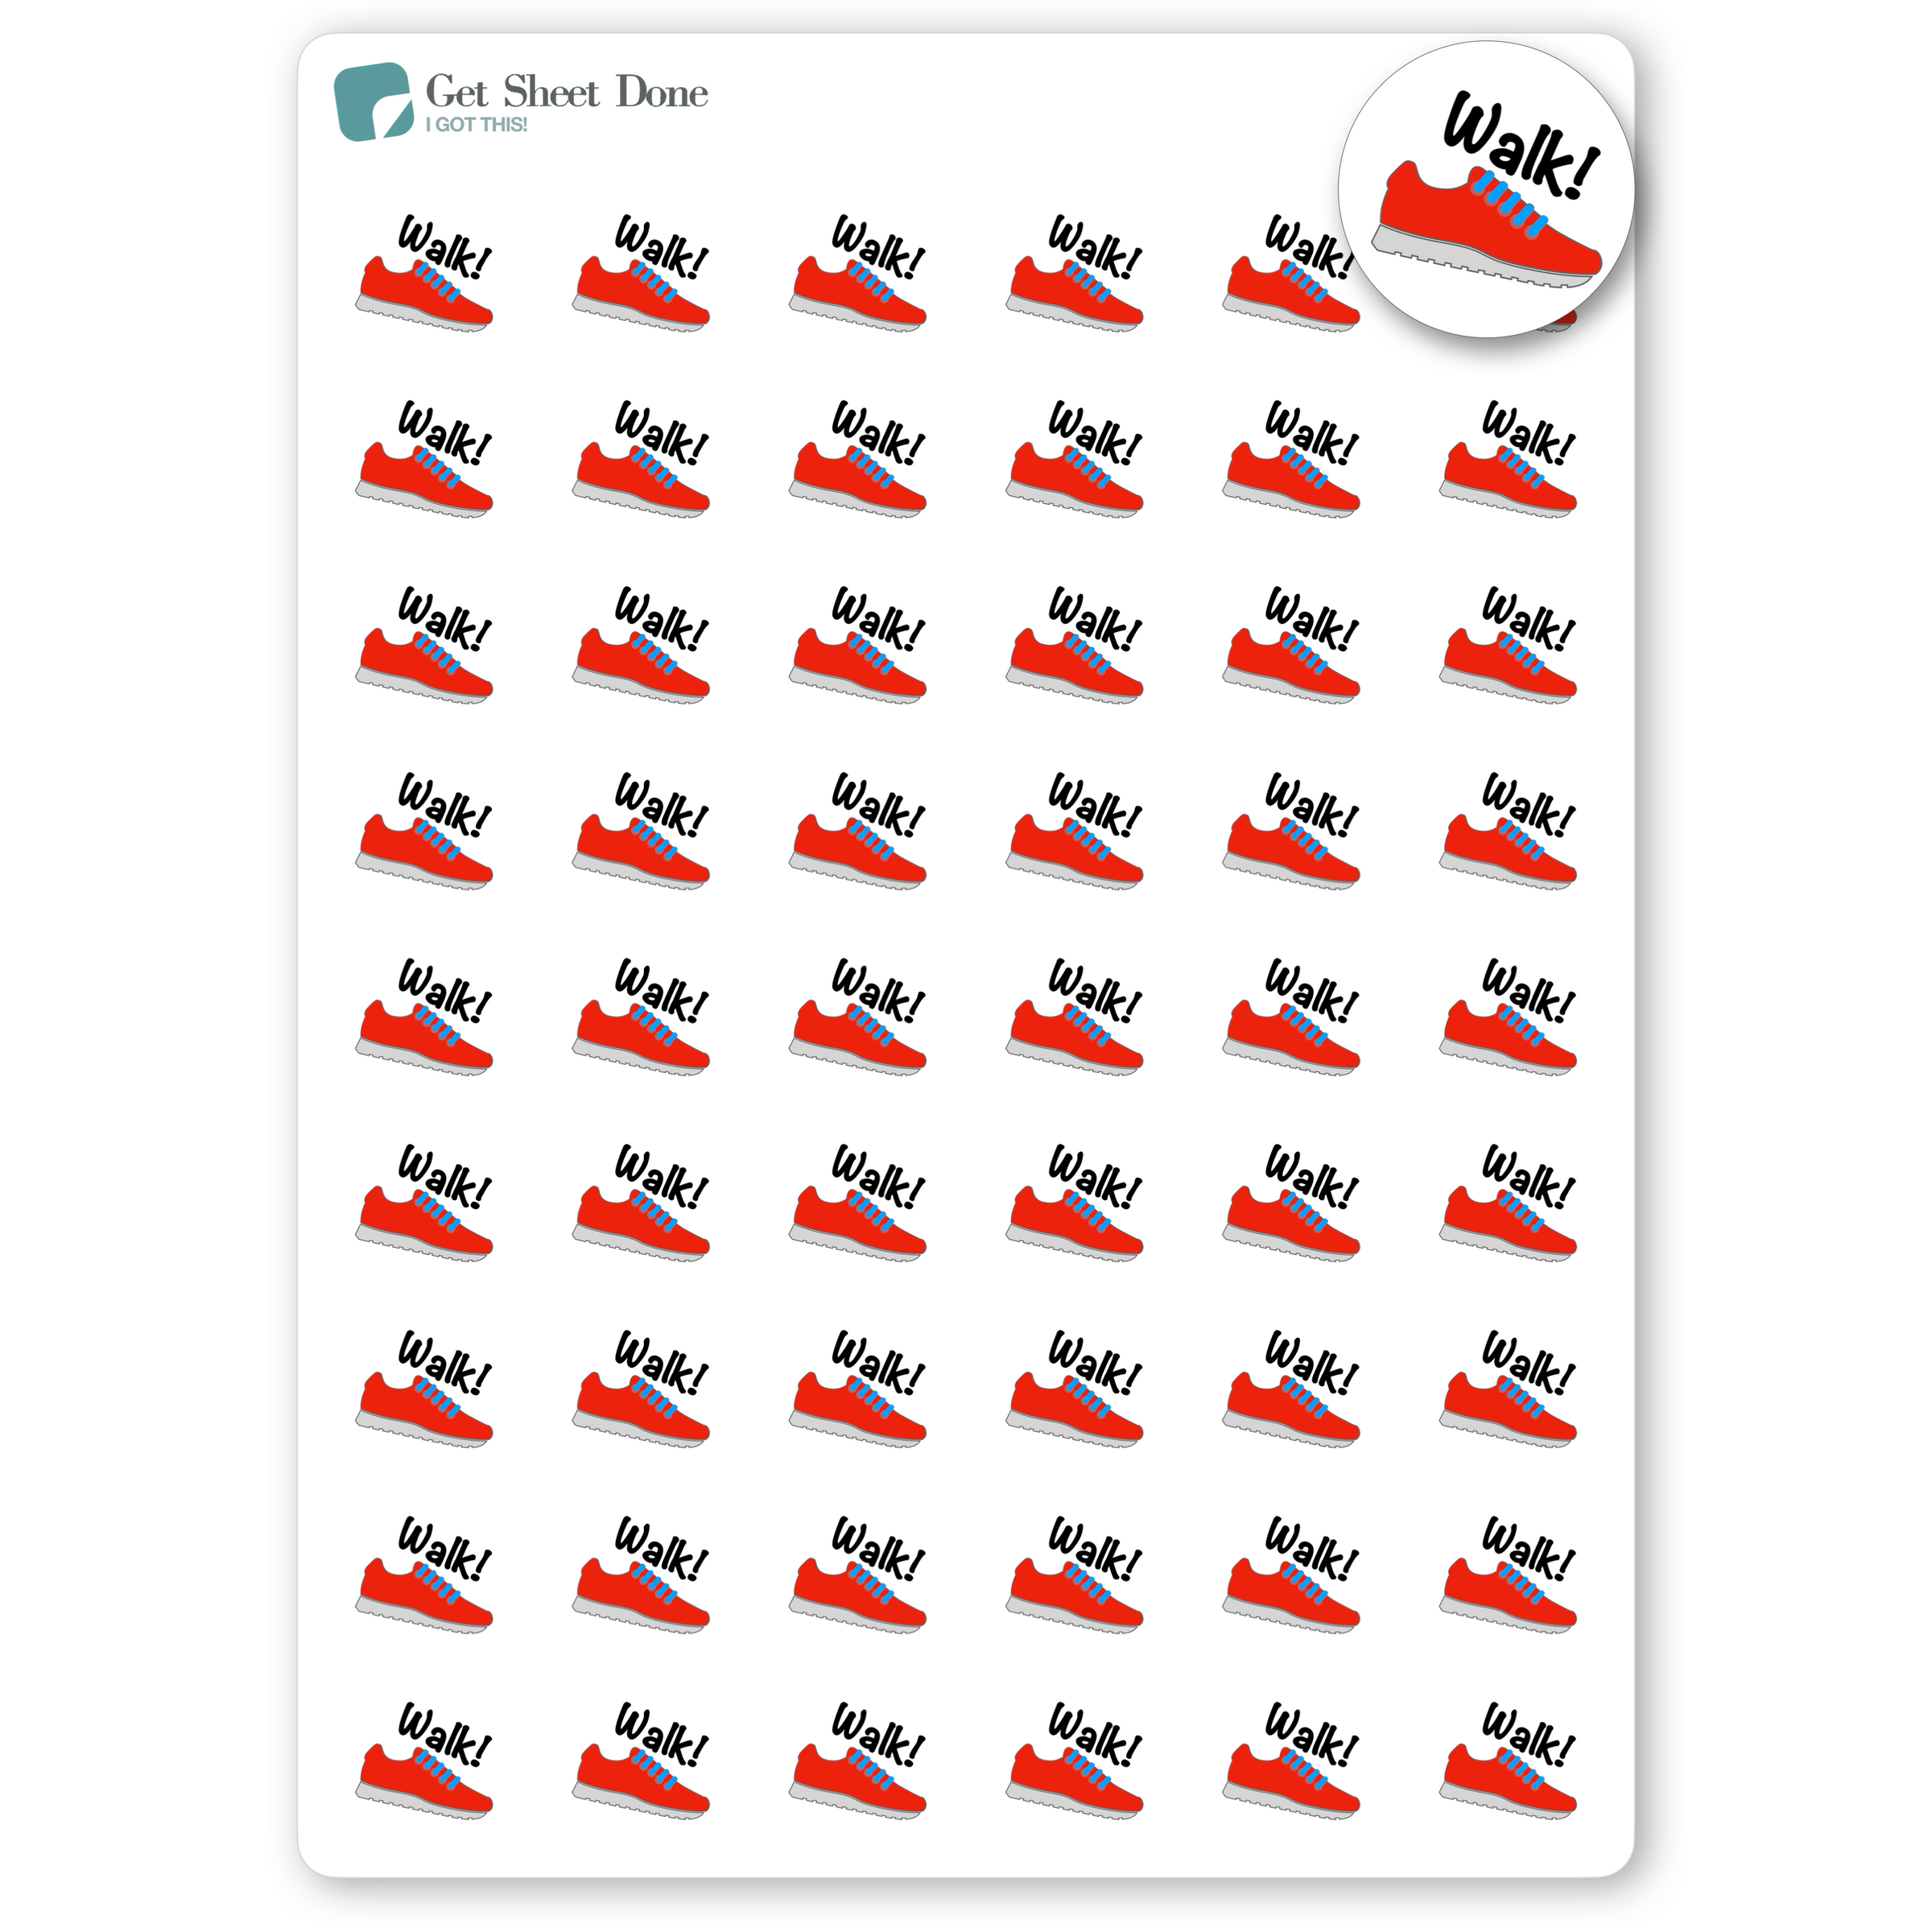 Run Exercise Planner Stickers